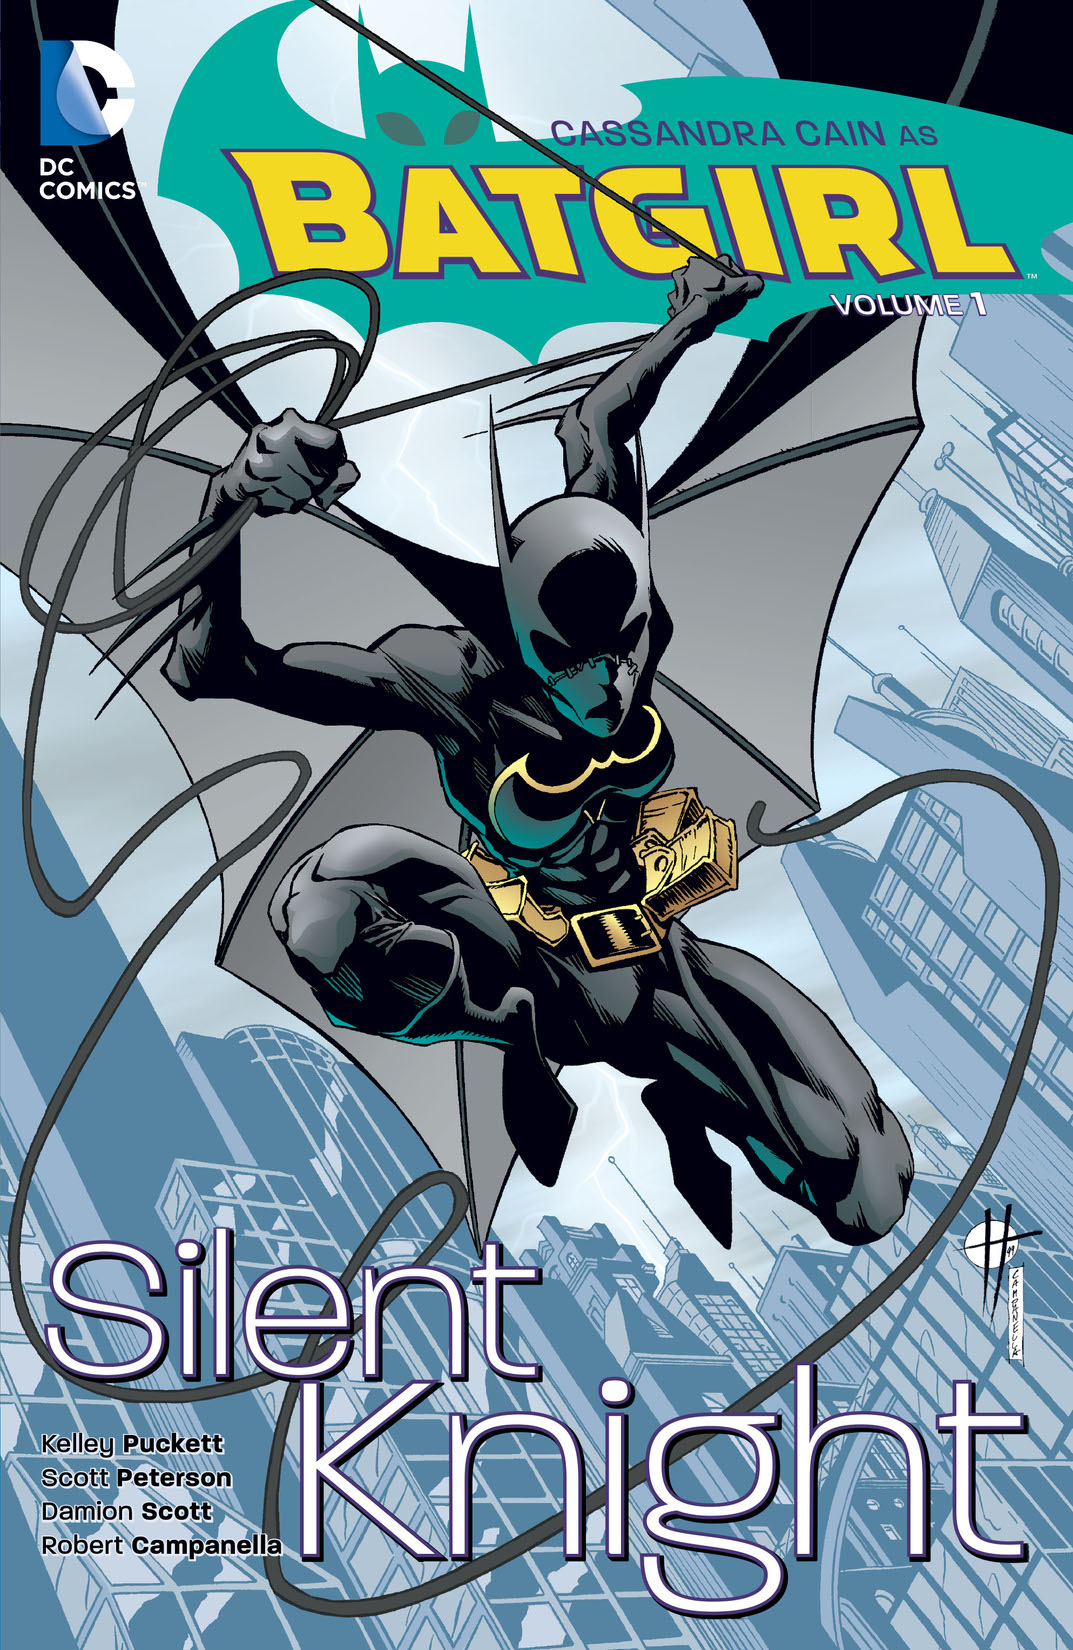 Batgirl Vol. 1: Silent Knight preview images